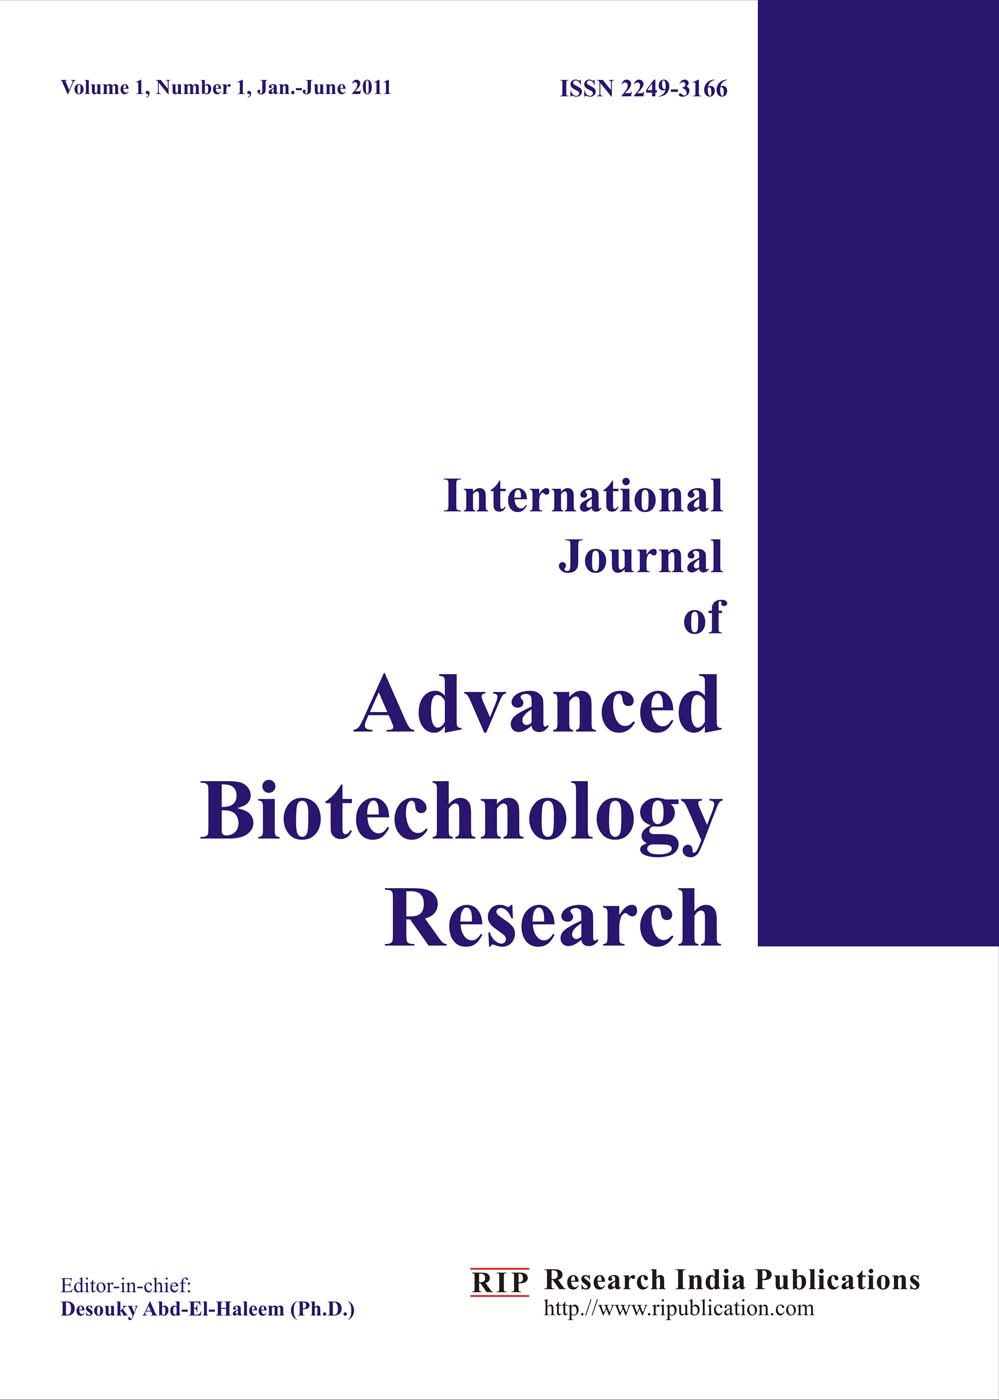 research journal of biotechnology website